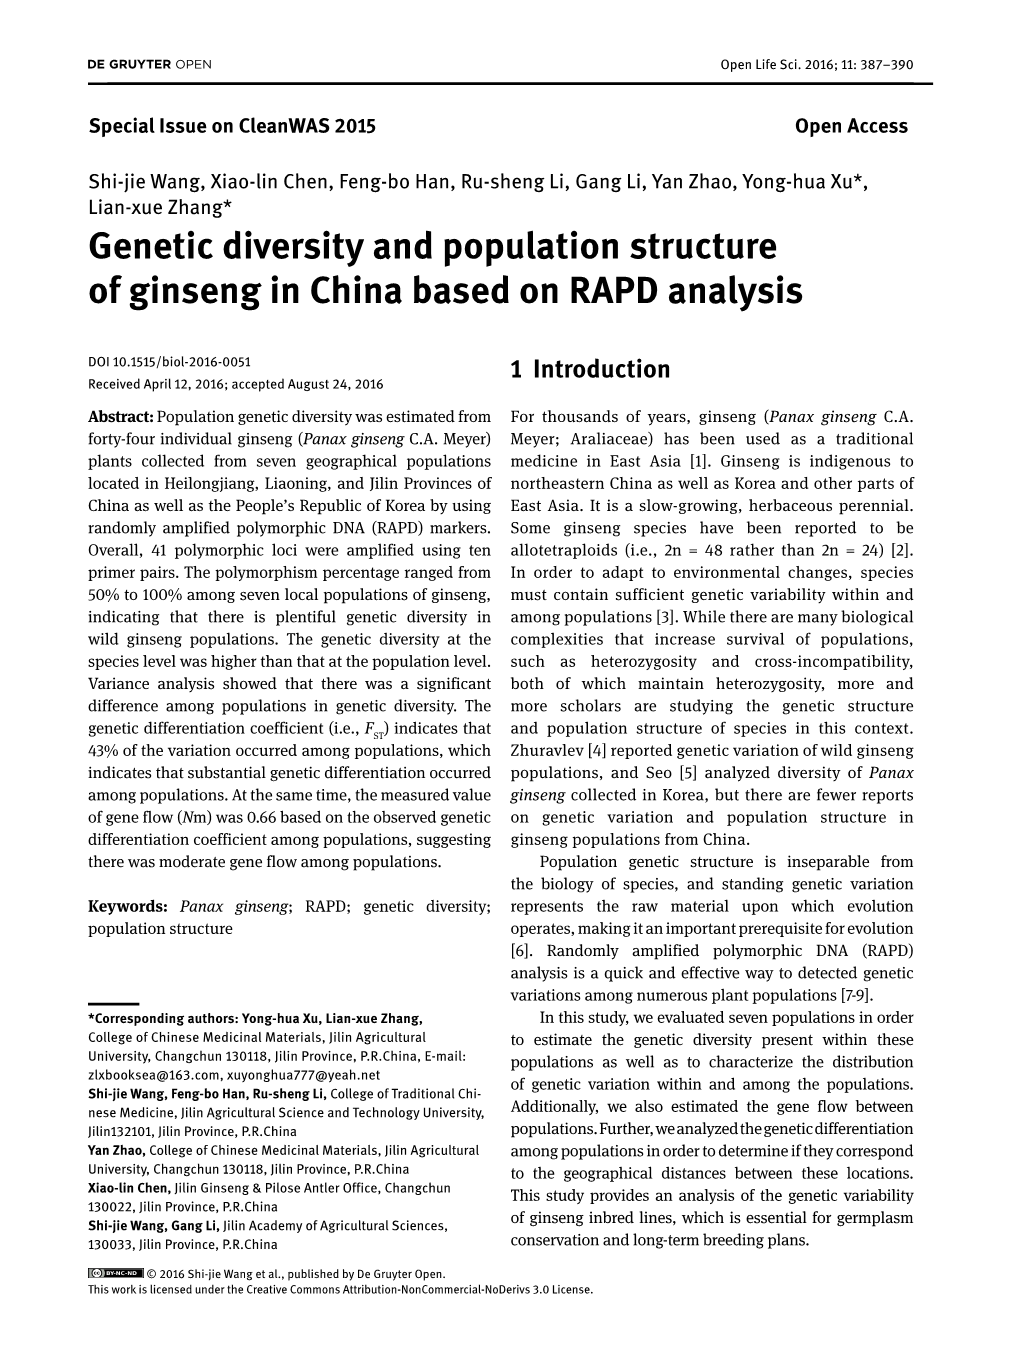 Genetic Diversity and Population Structure of Ginseng in China Based on RAPD Analysis